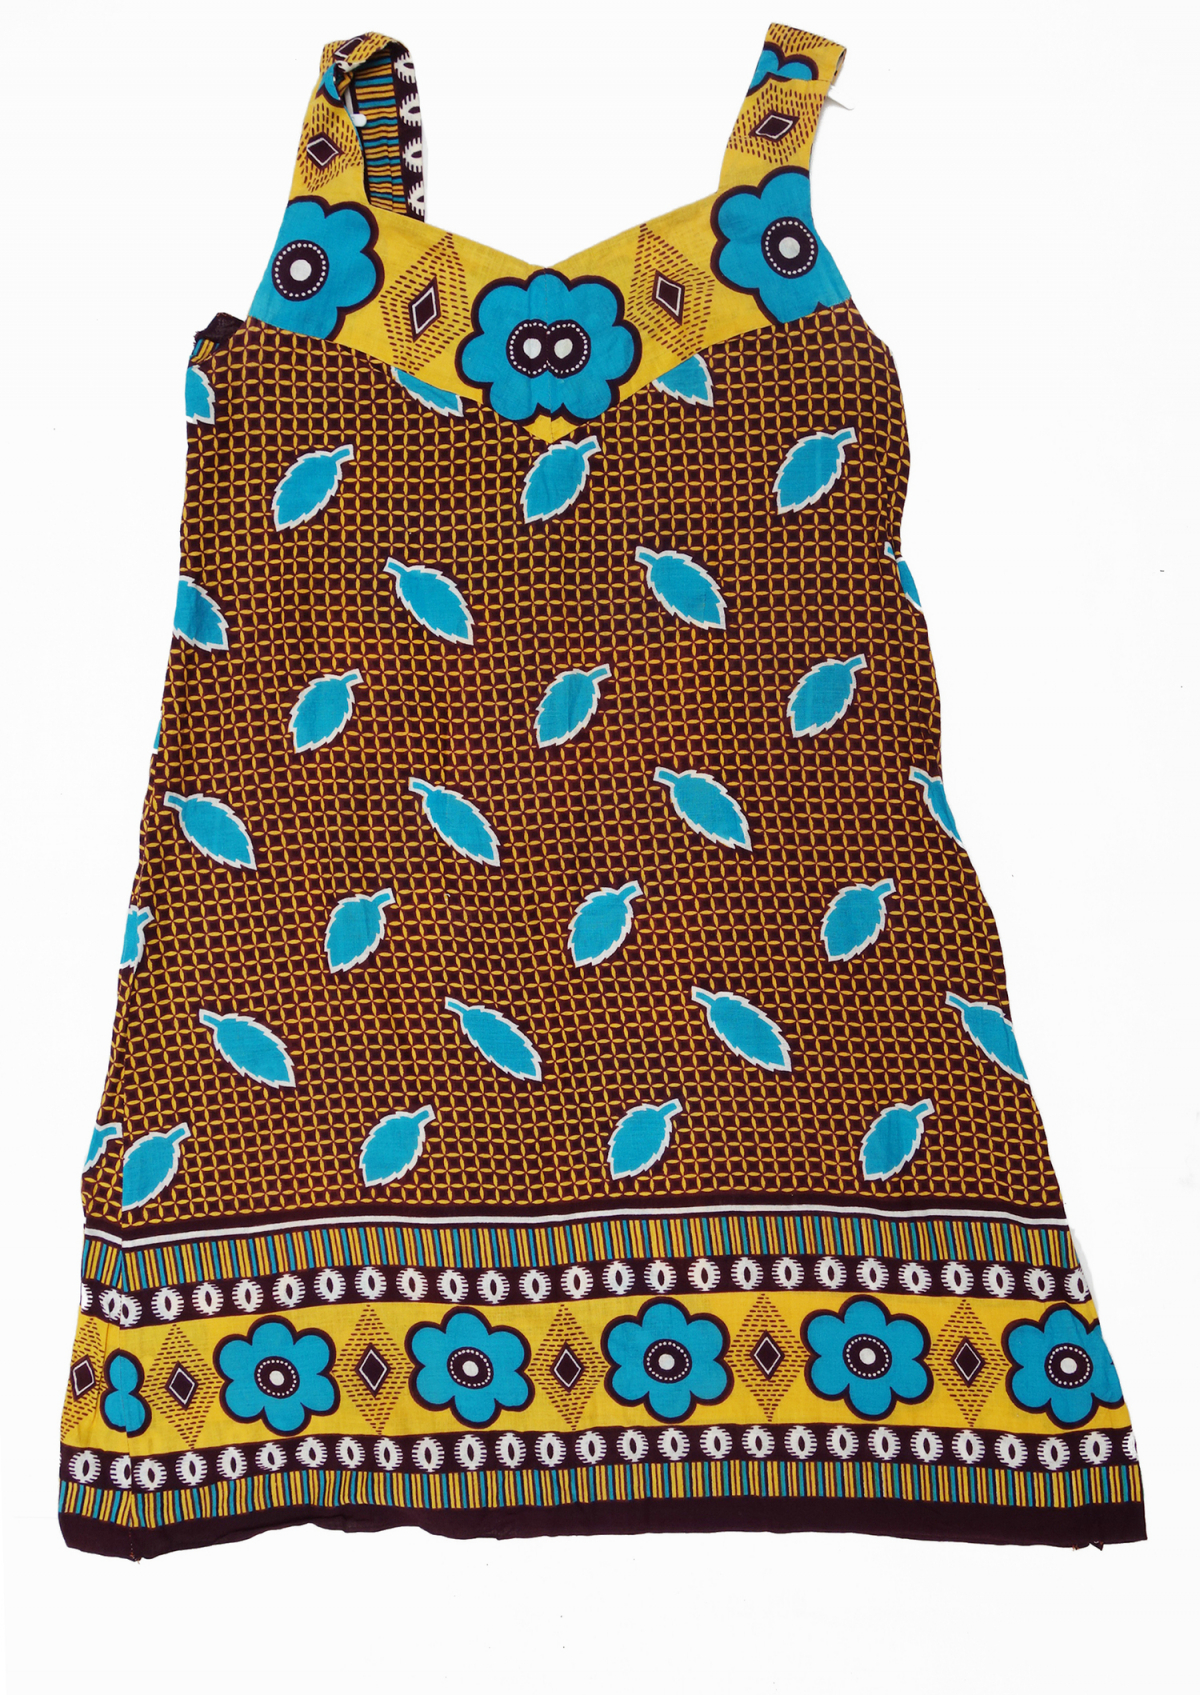 Late 20th century East African cotton dress made from kanga material.